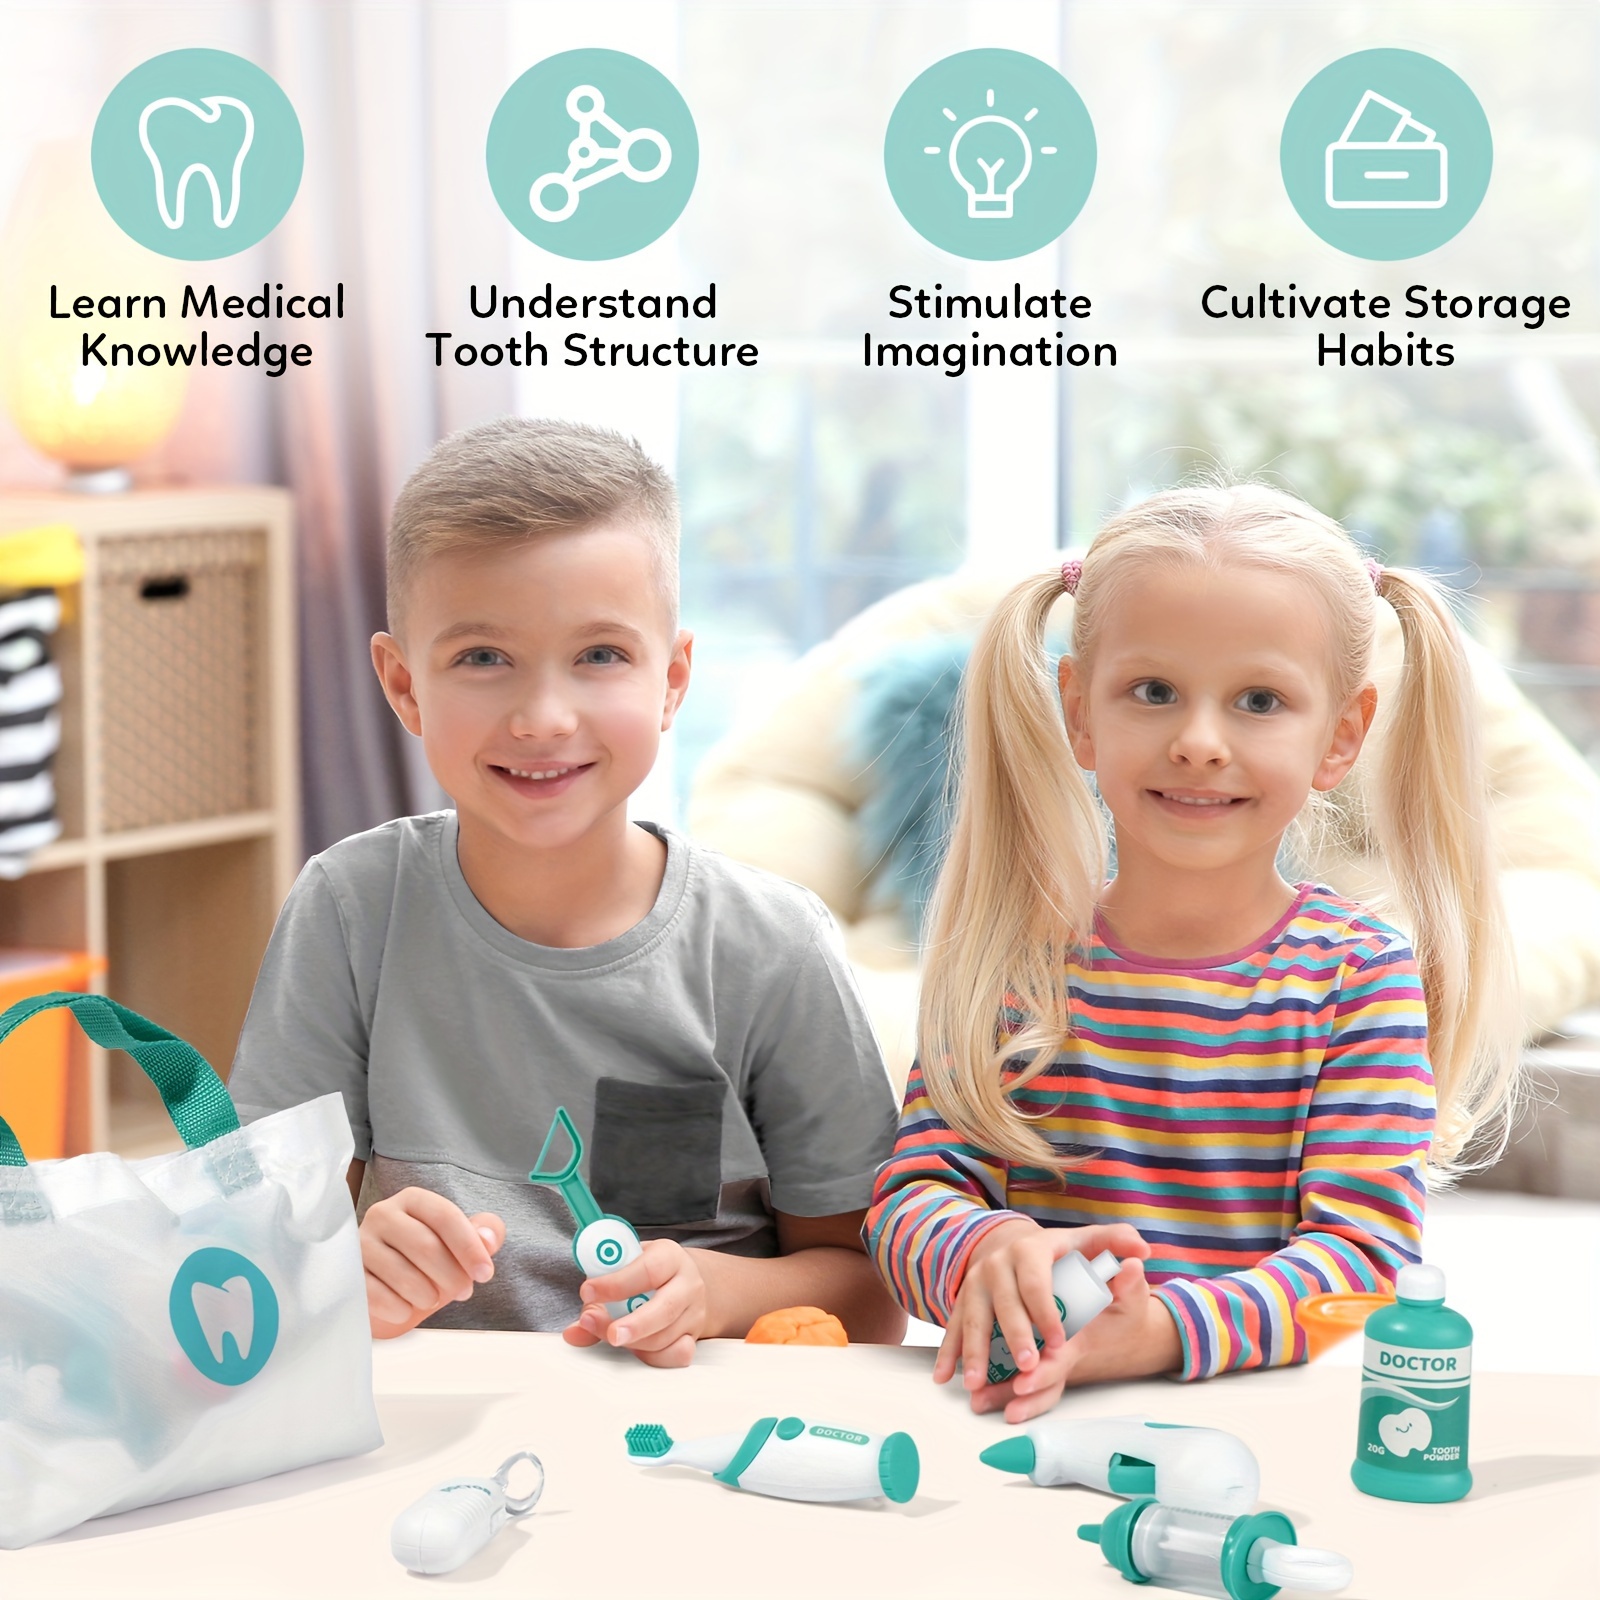 Dentist Kit for Kids with Pretend Teeth, Dental Accessories and Dress Up  Costume - Kids Dentist Kit Play Set - Pretend Play Gift for Kids Toddlers